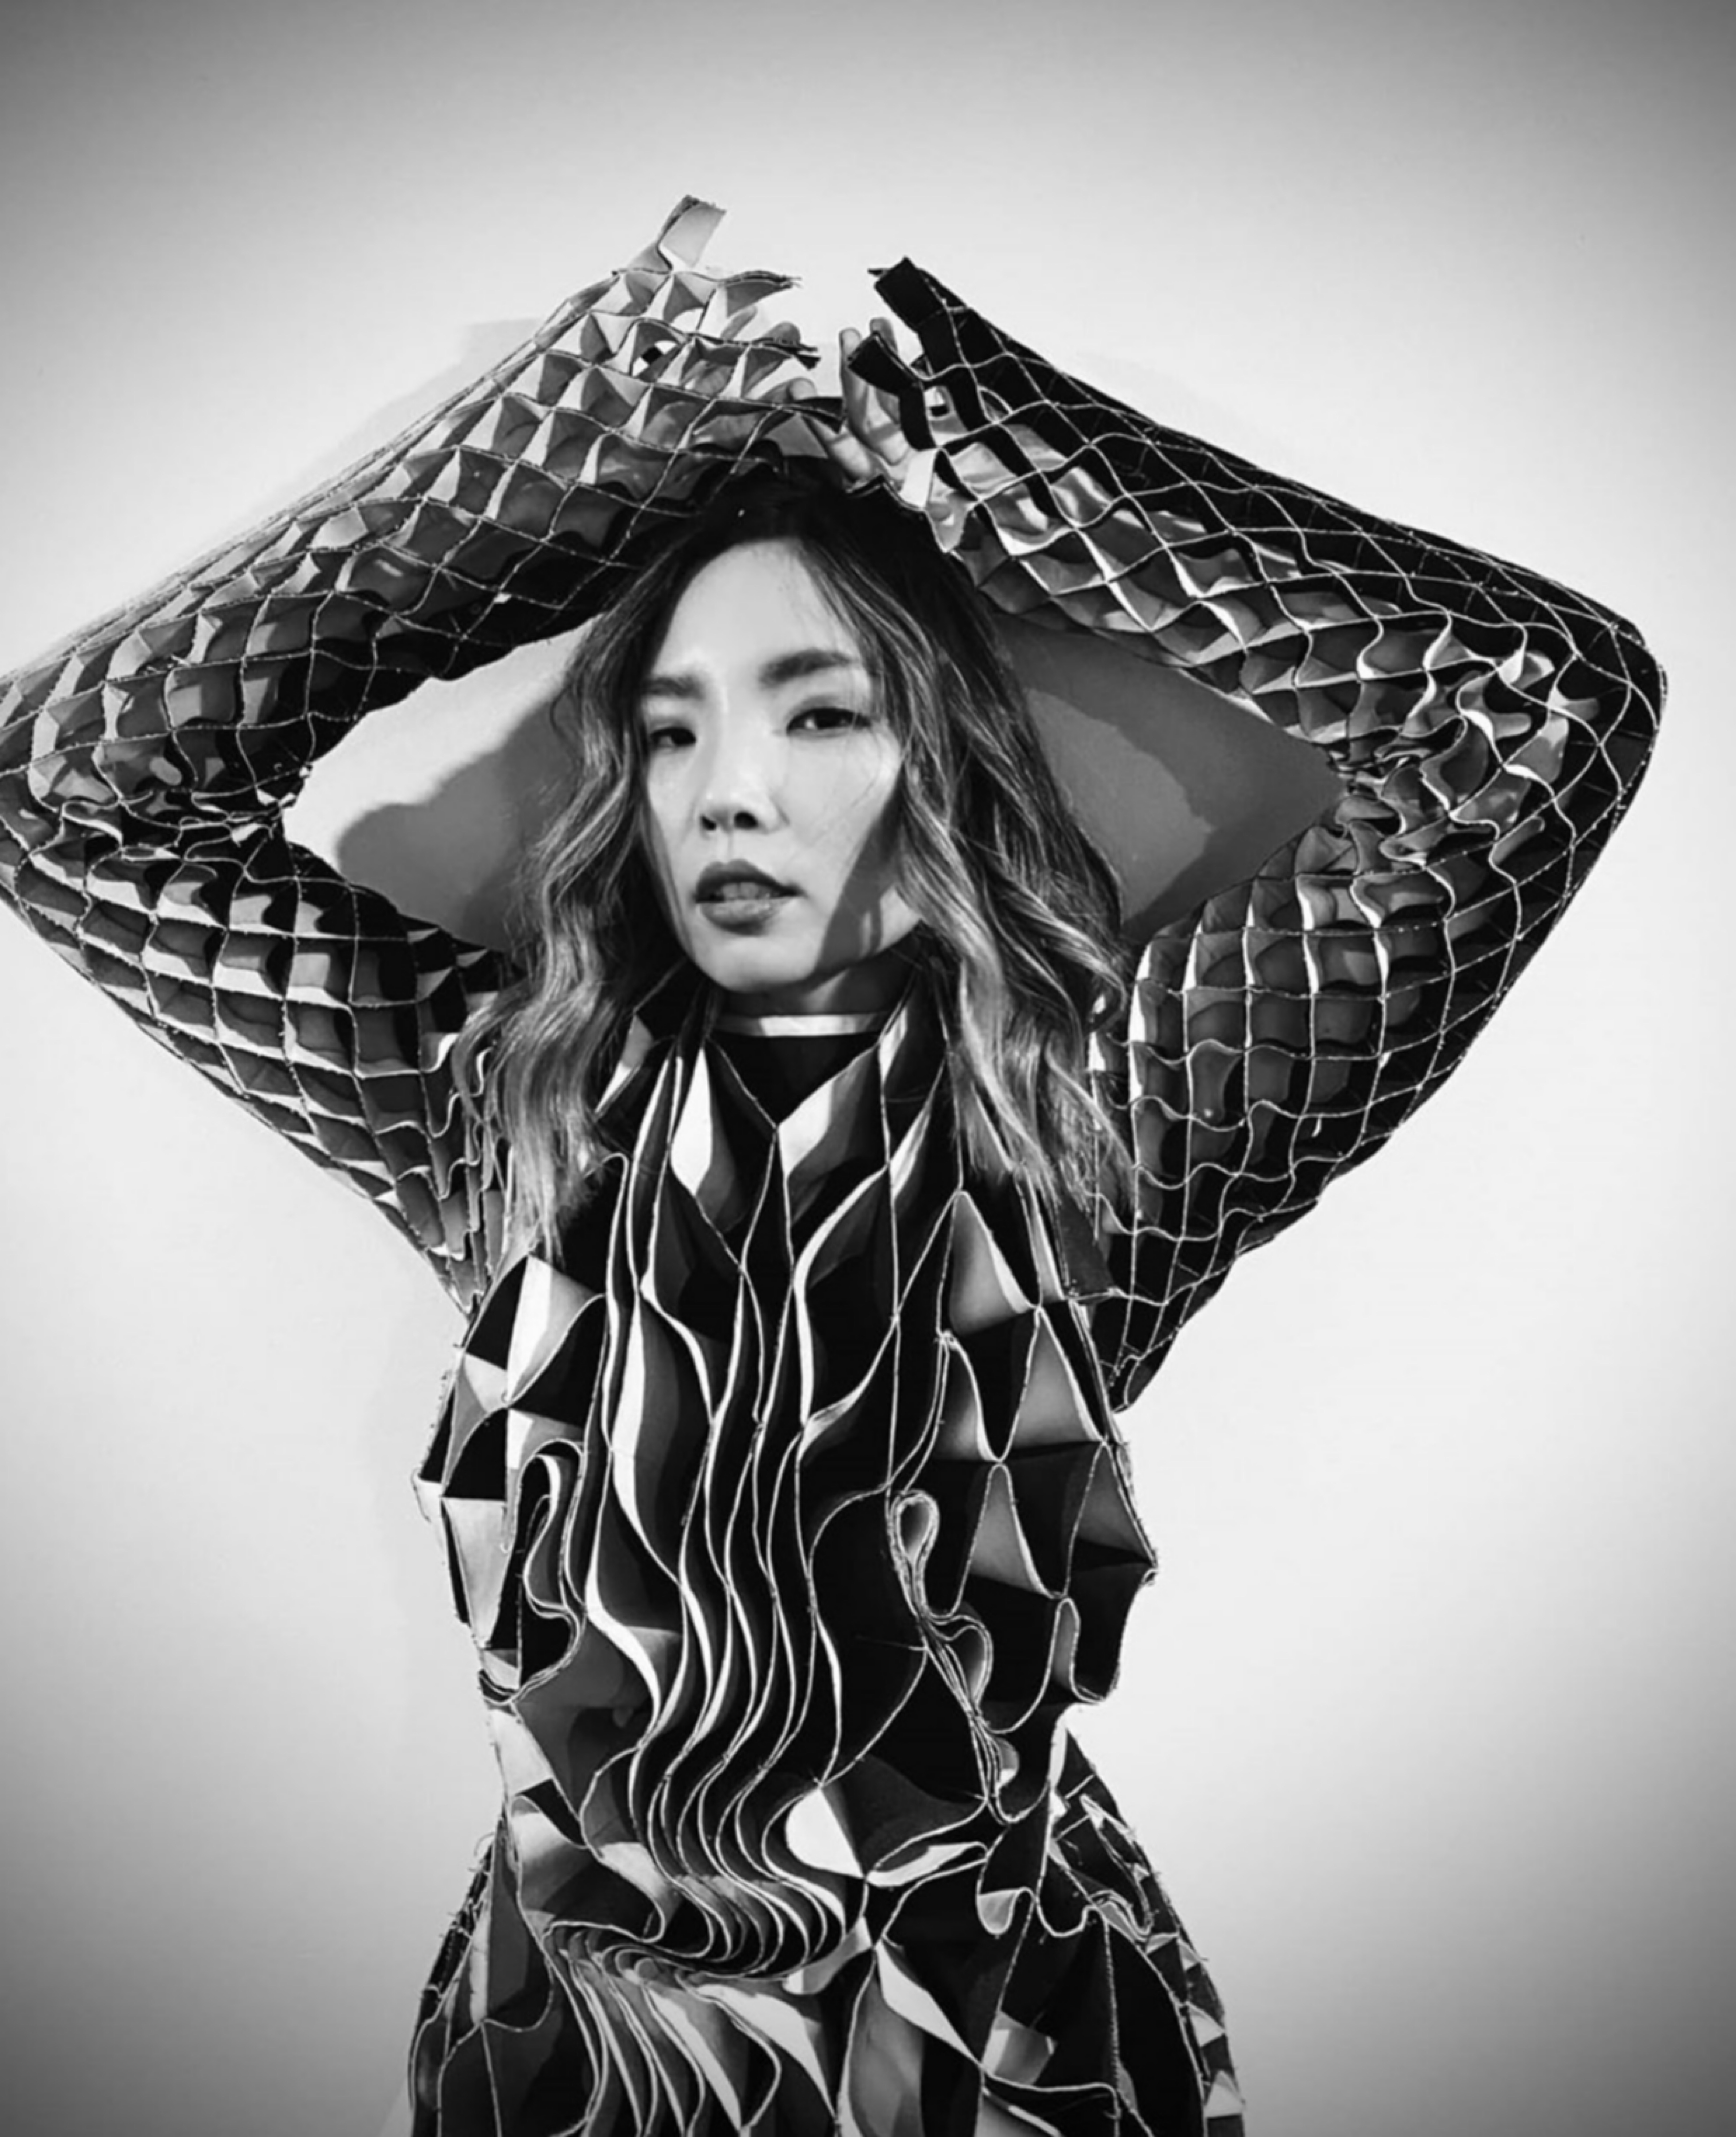 Dami Im’s new “Paper Dragon” Single has been released